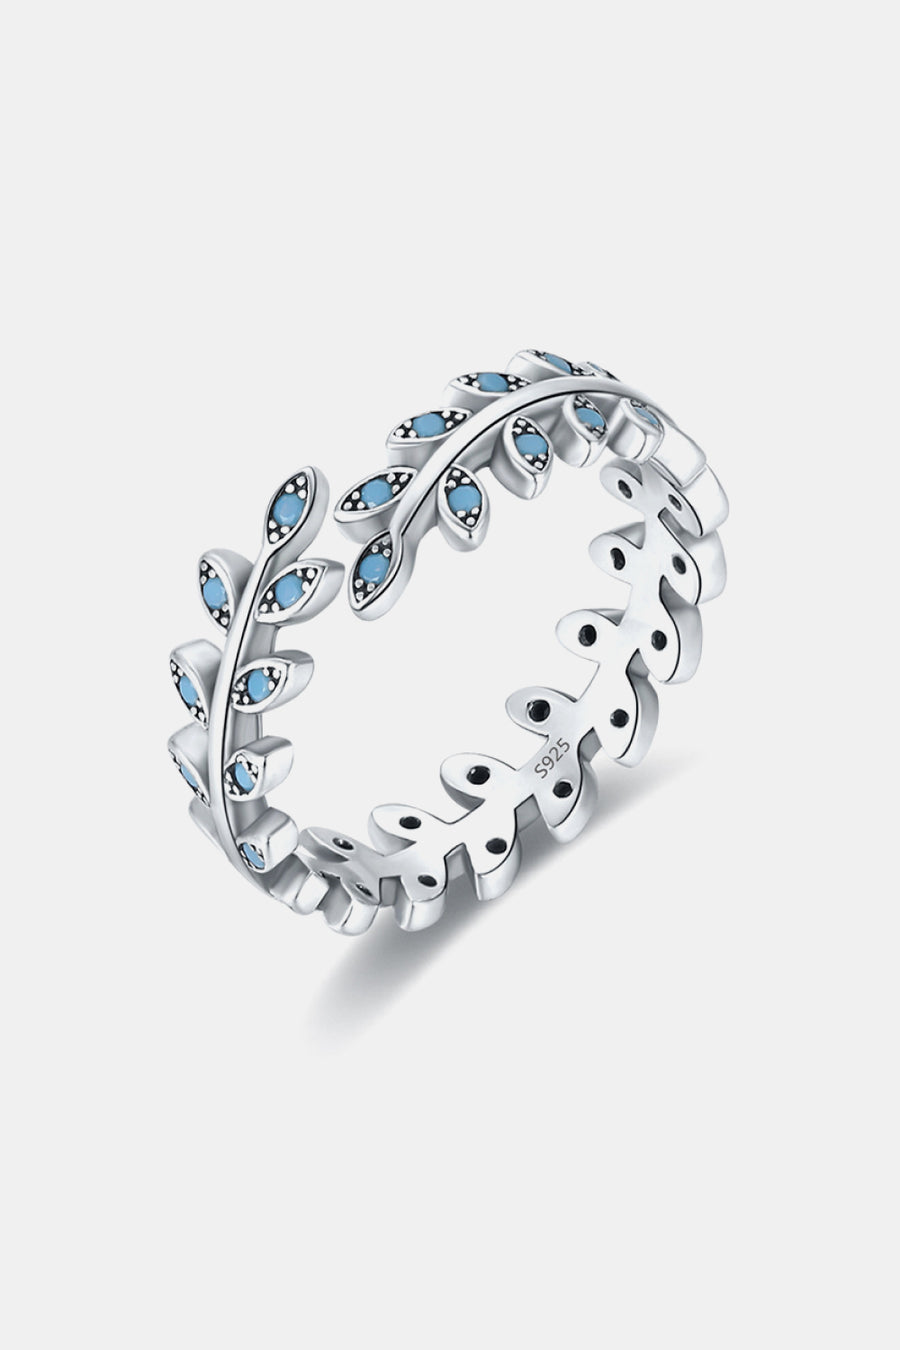 The Poet 925 Sterling Silver Leaf Shape Artificial Turquoise Bypass Ring